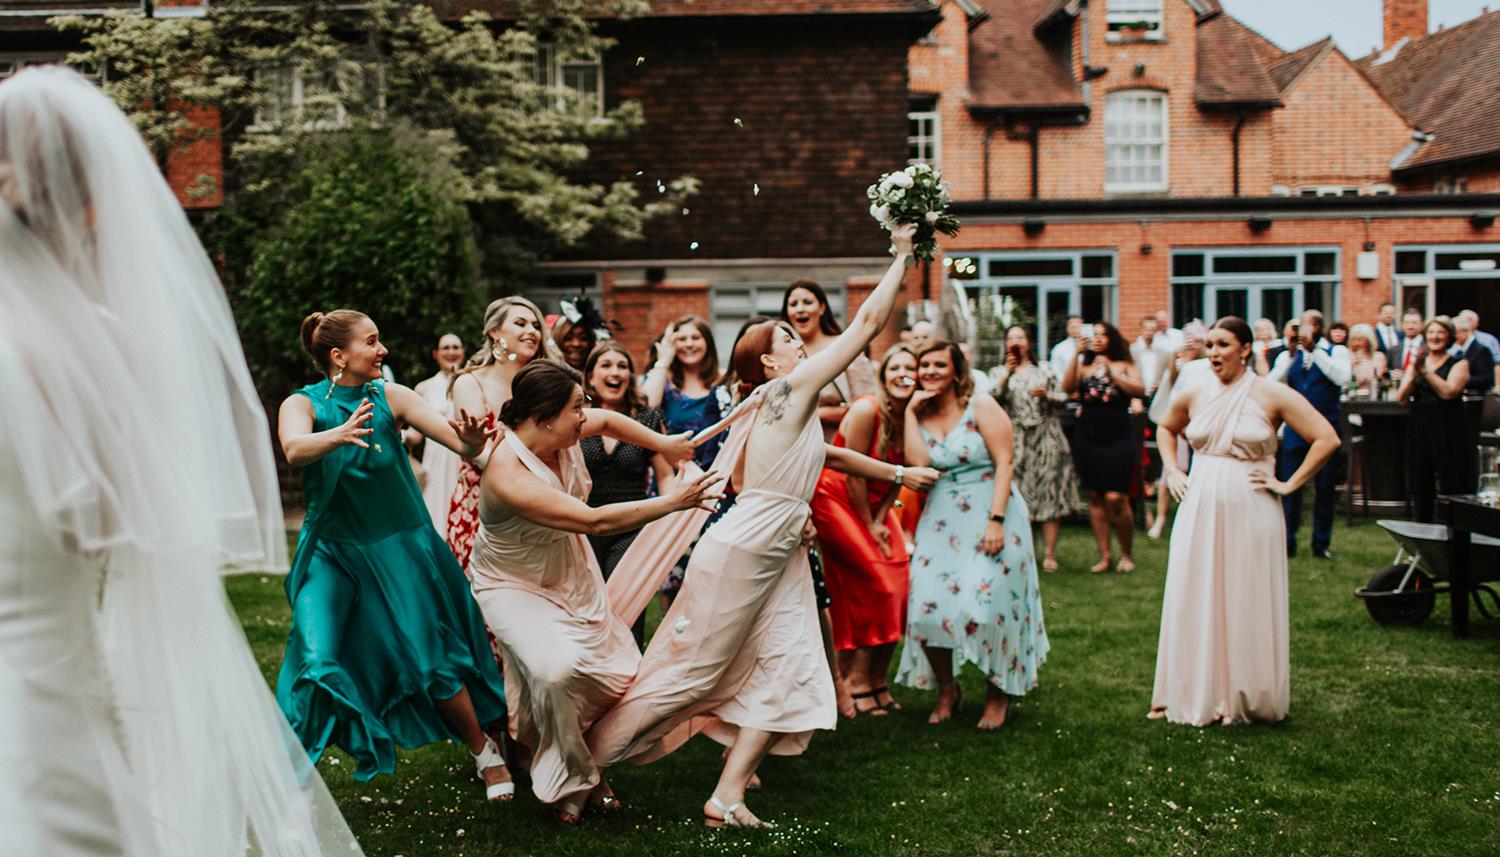 Catching the bouquet. Photo Credit: Oxana Mazur Photography